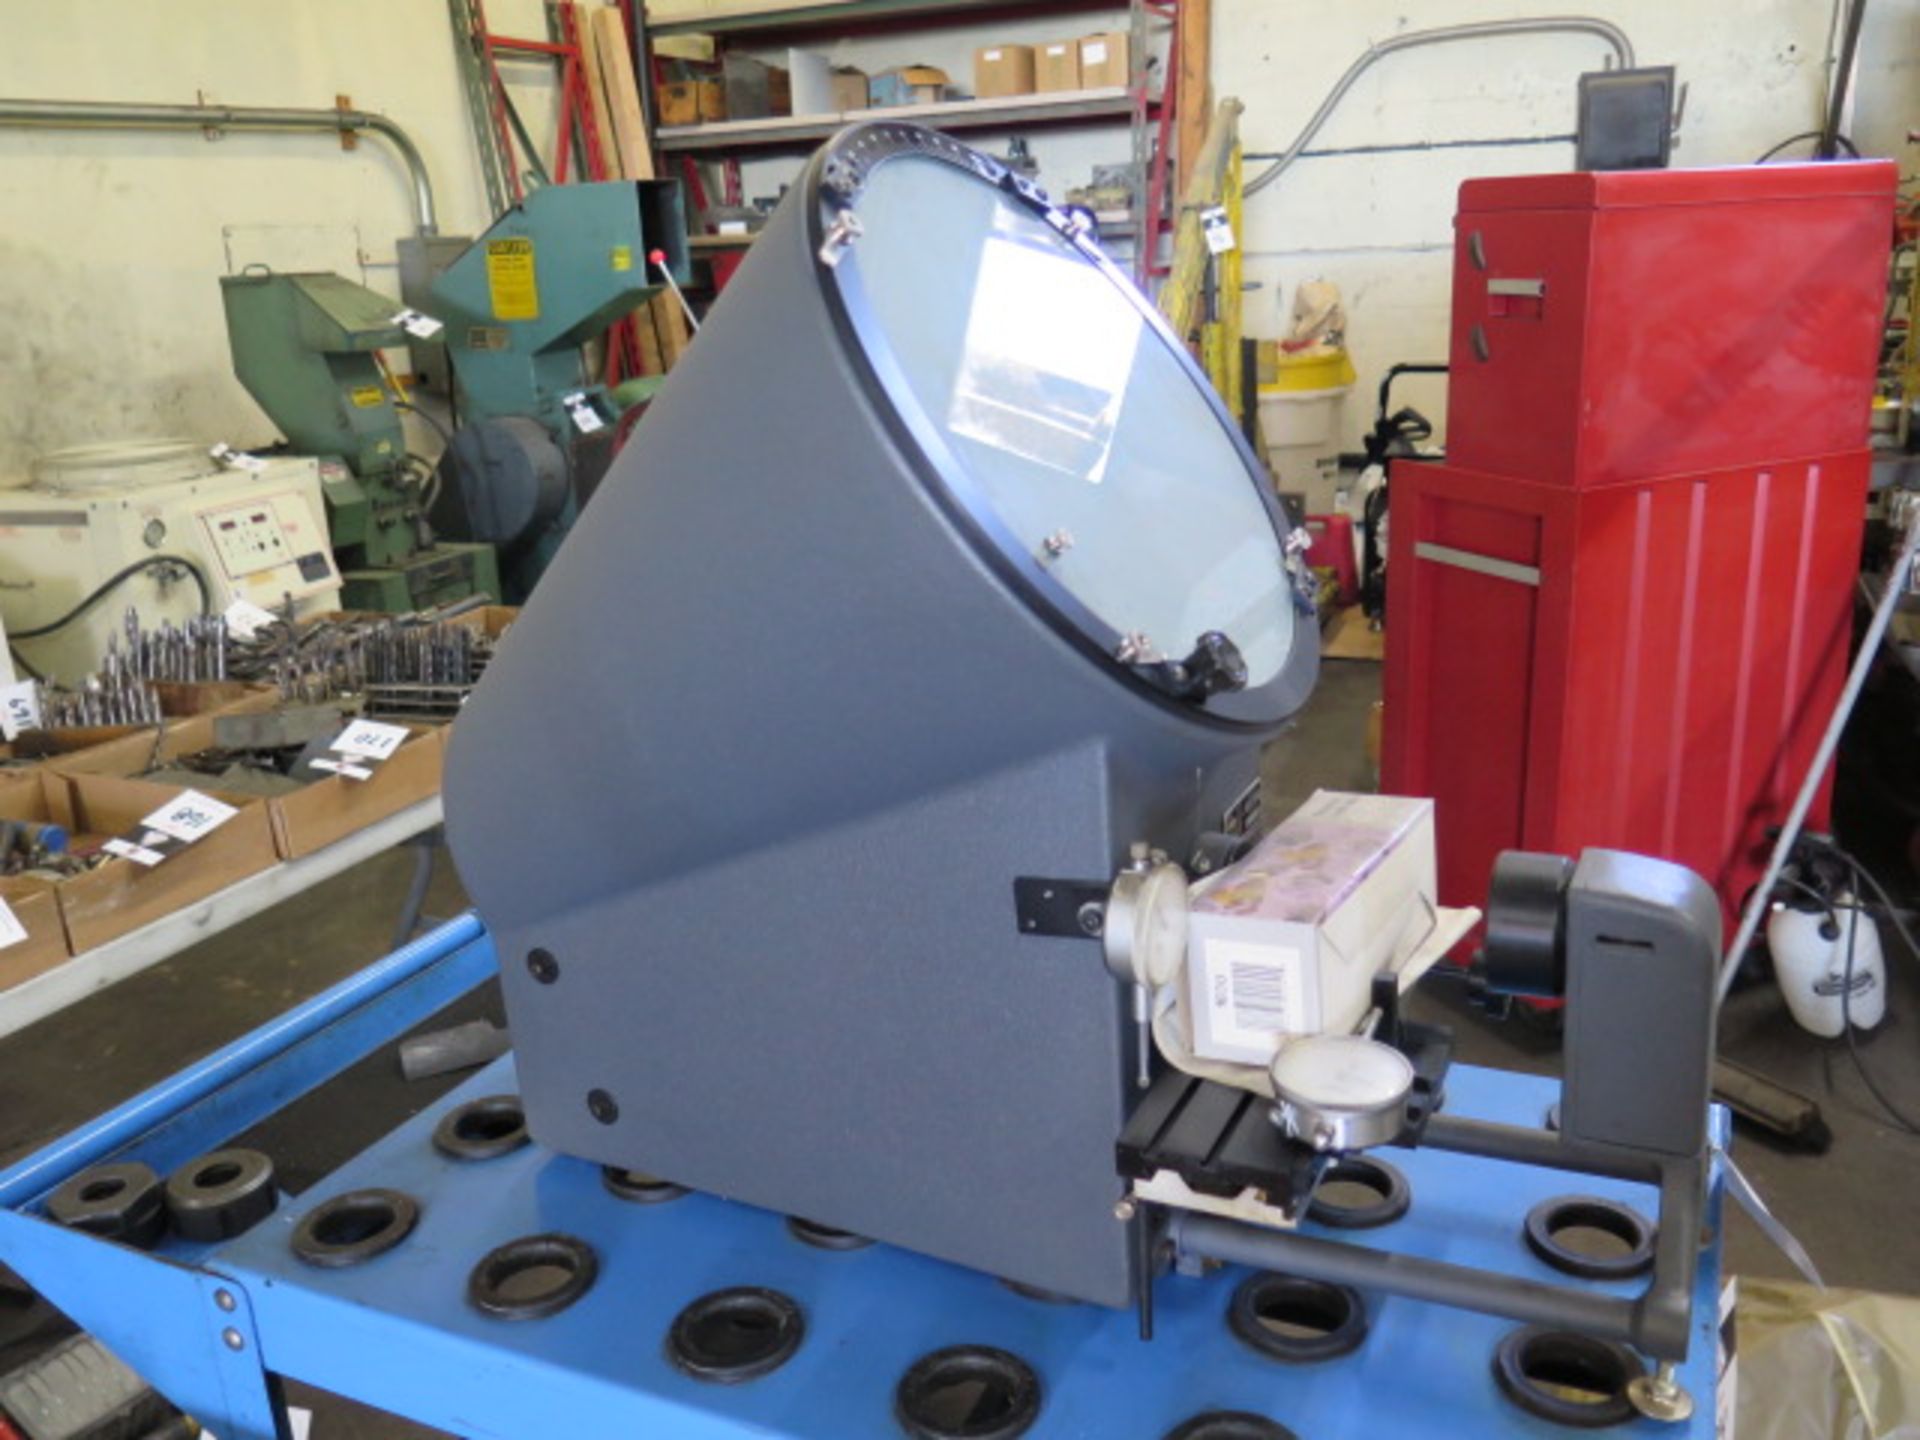 MicroVu mdl. 500HP 12” Table Model Optical Comparator s/n 25521 (SOLD AS-IS - NO WARRANTY) - Image 3 of 7